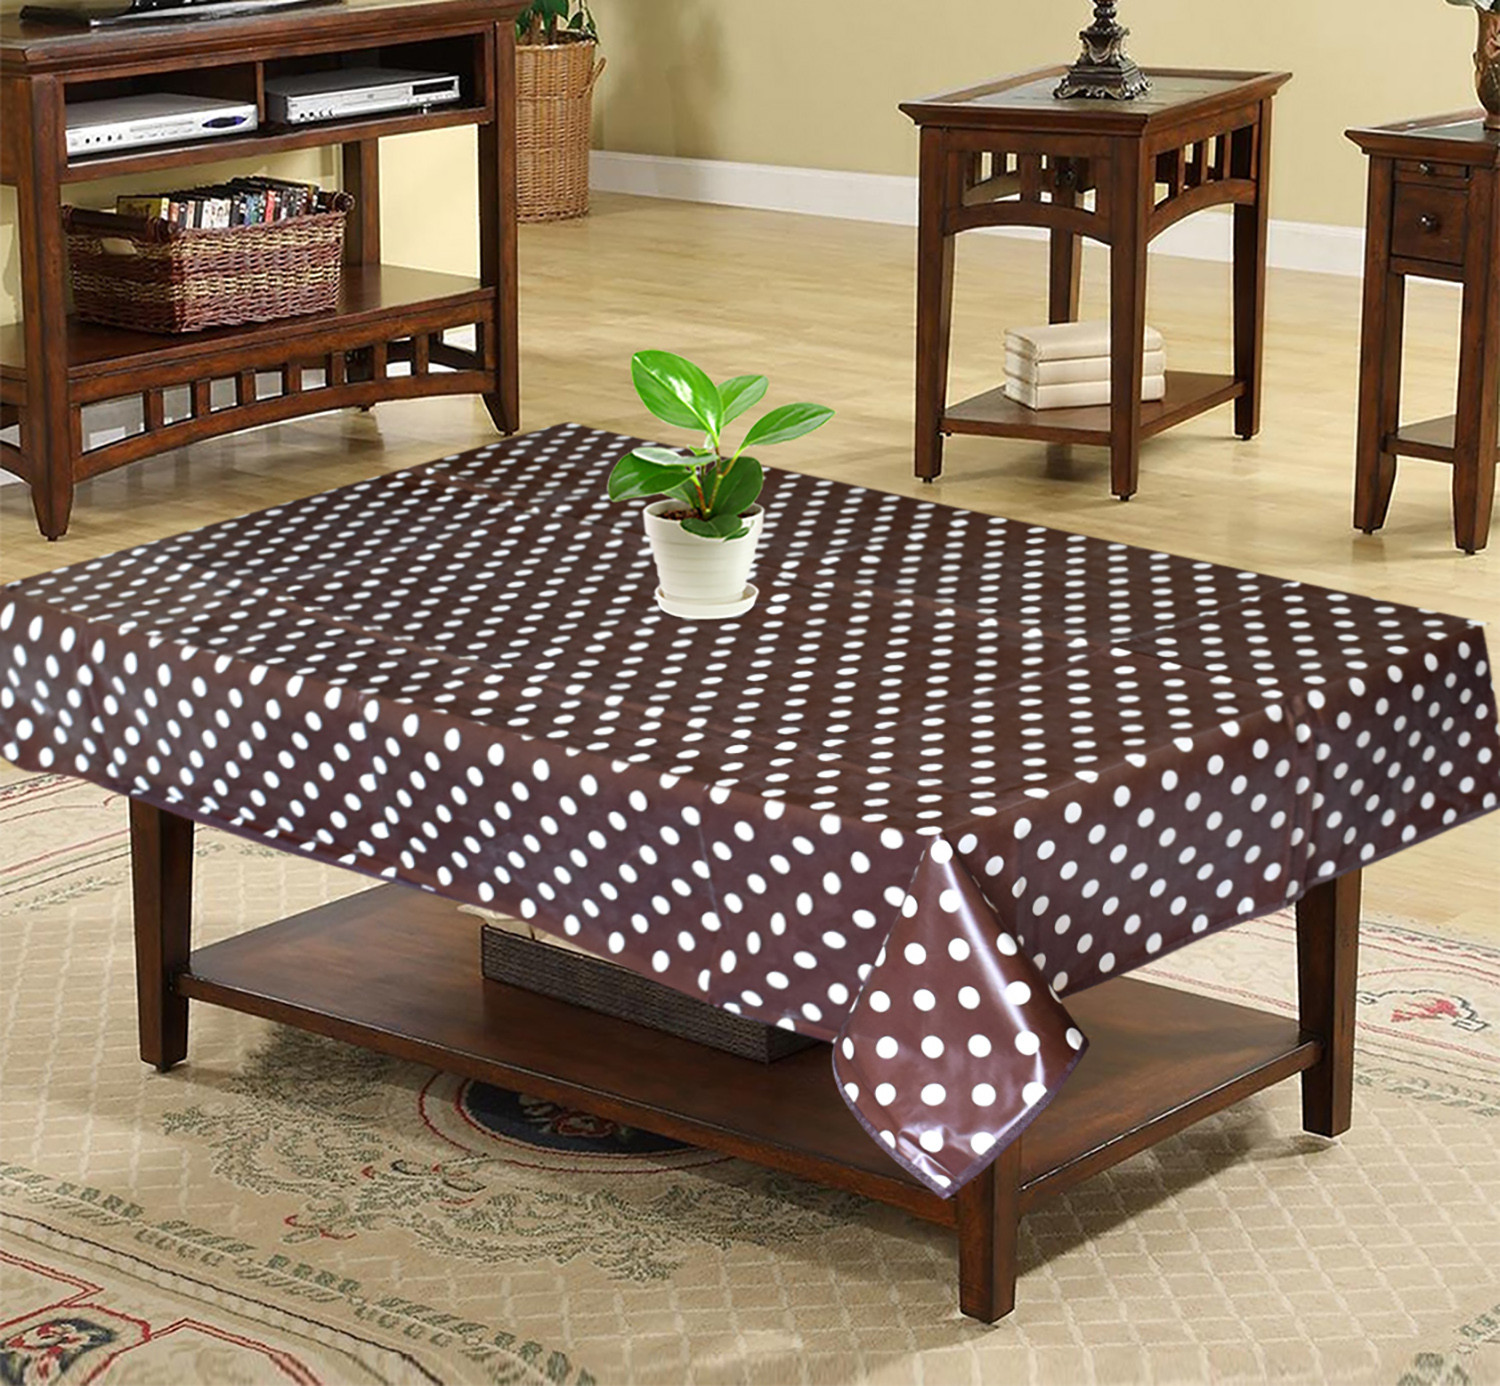 Kuber Industries Dot Print PVC Reversable Center Table Cover For Home Decorative Luxurious 4 Seater, 60